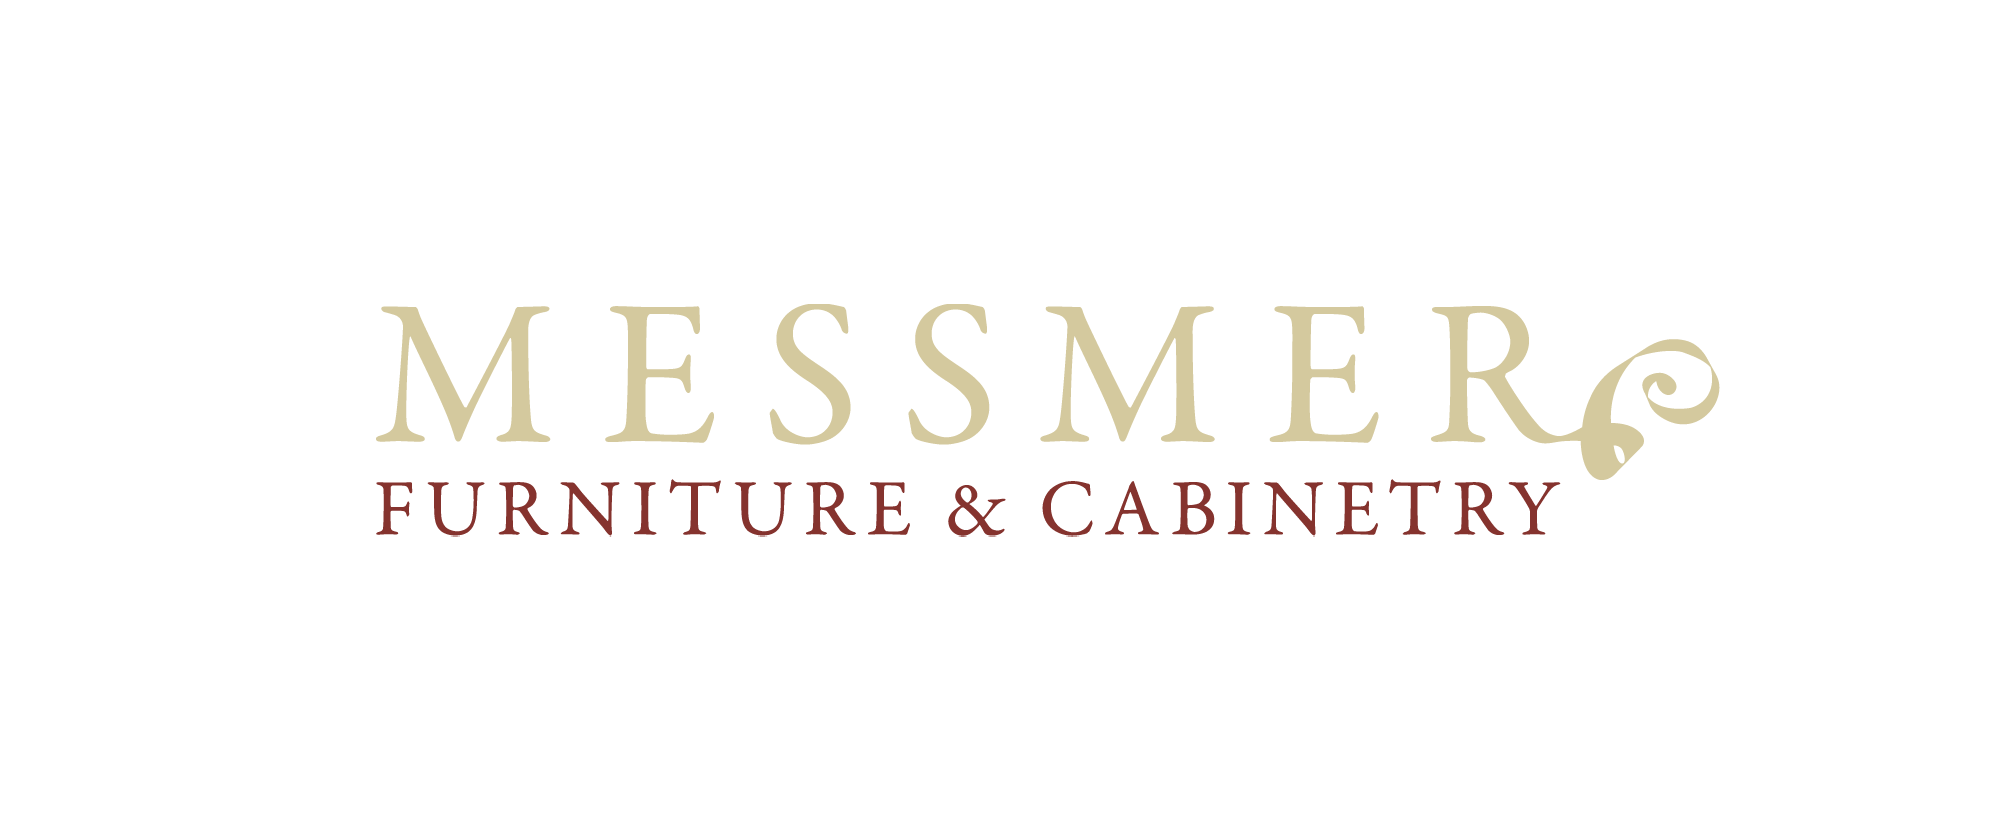 Messmer Furniture Cabinetry Identity